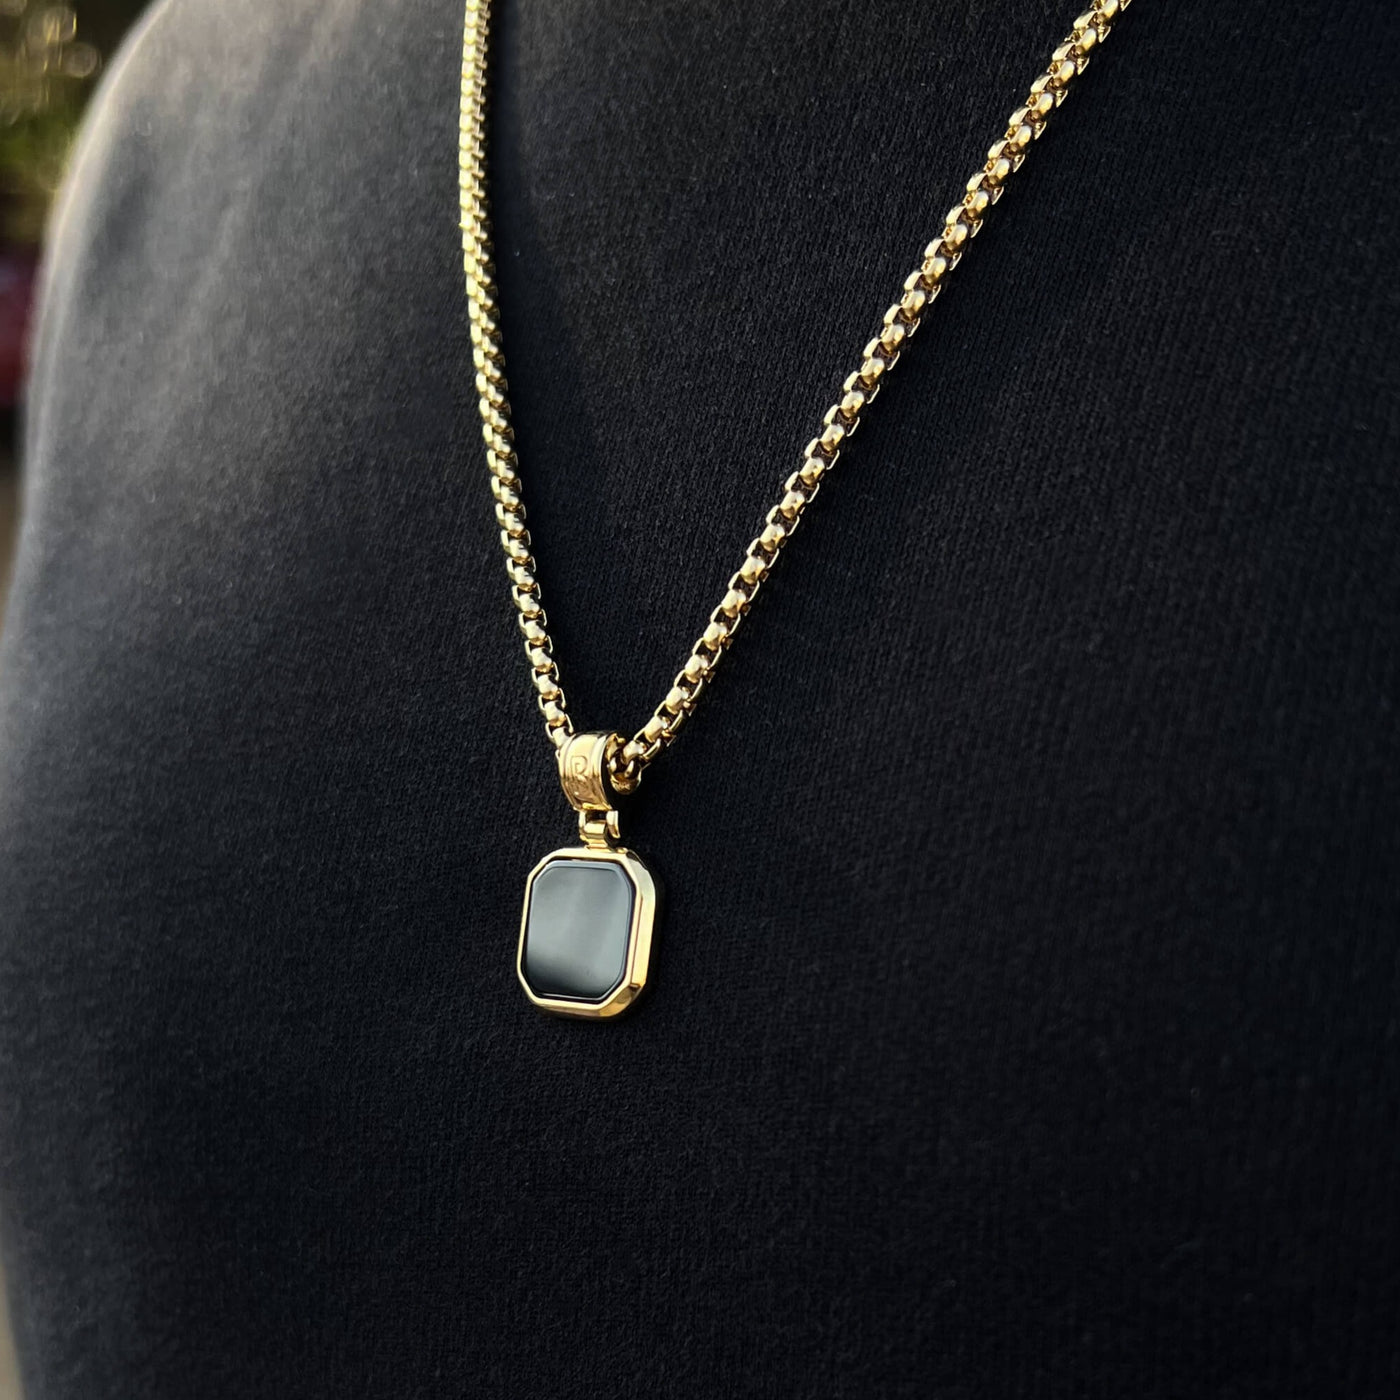 The Gold Plated Onyx Stone Square Necklace